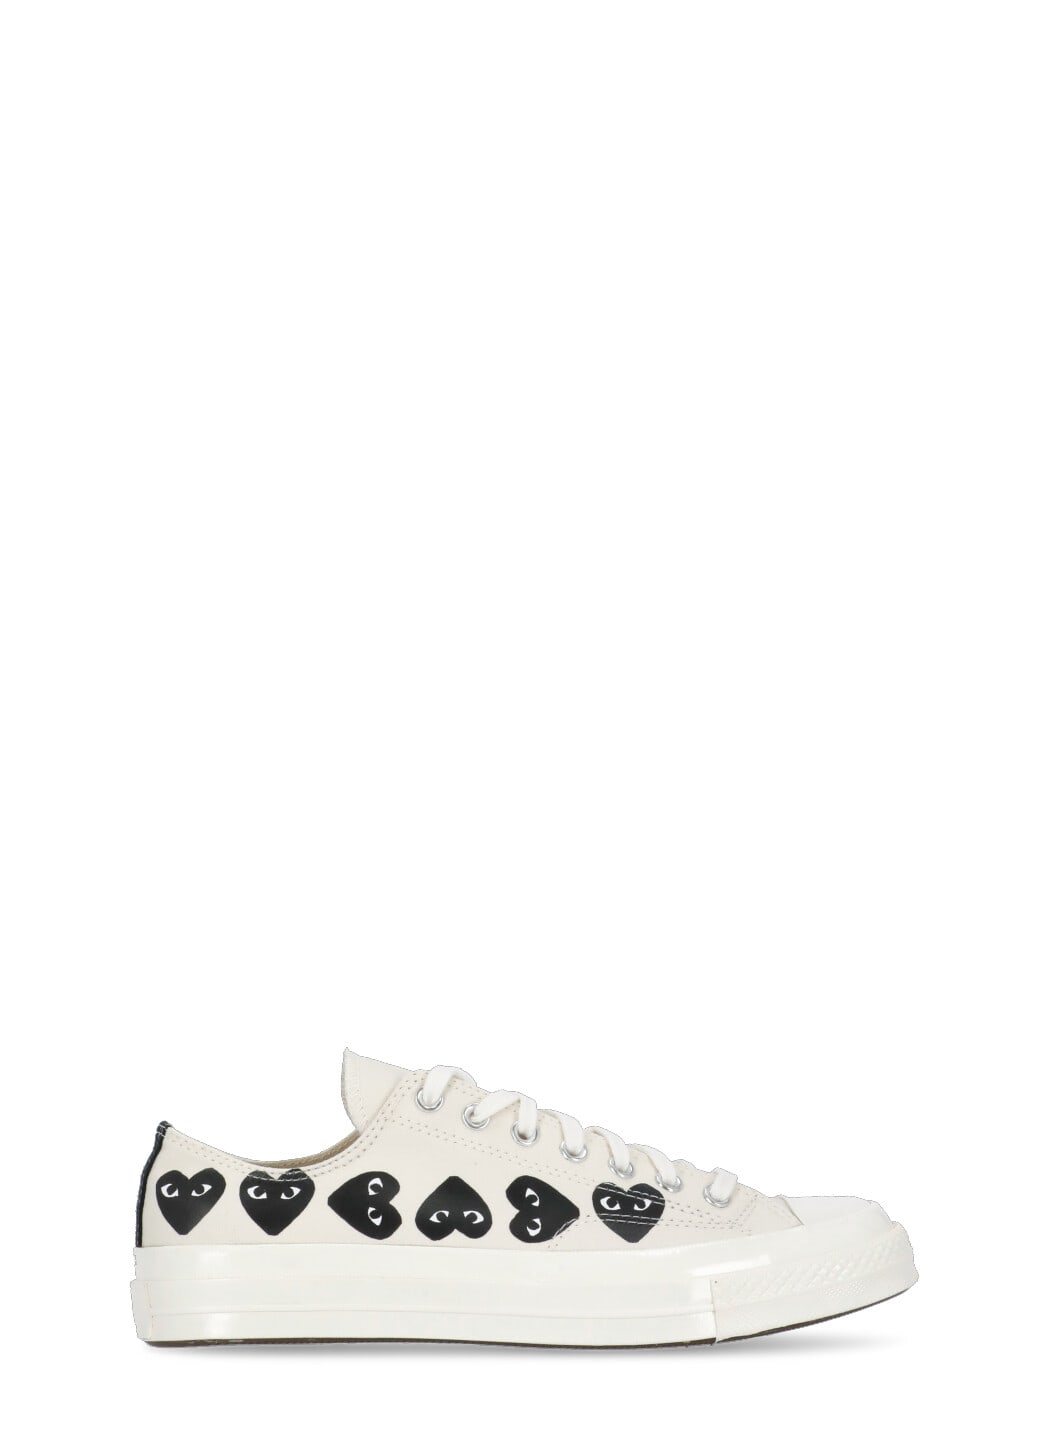 Comme Des Garçons Play Chuck 70 Sneakers In White